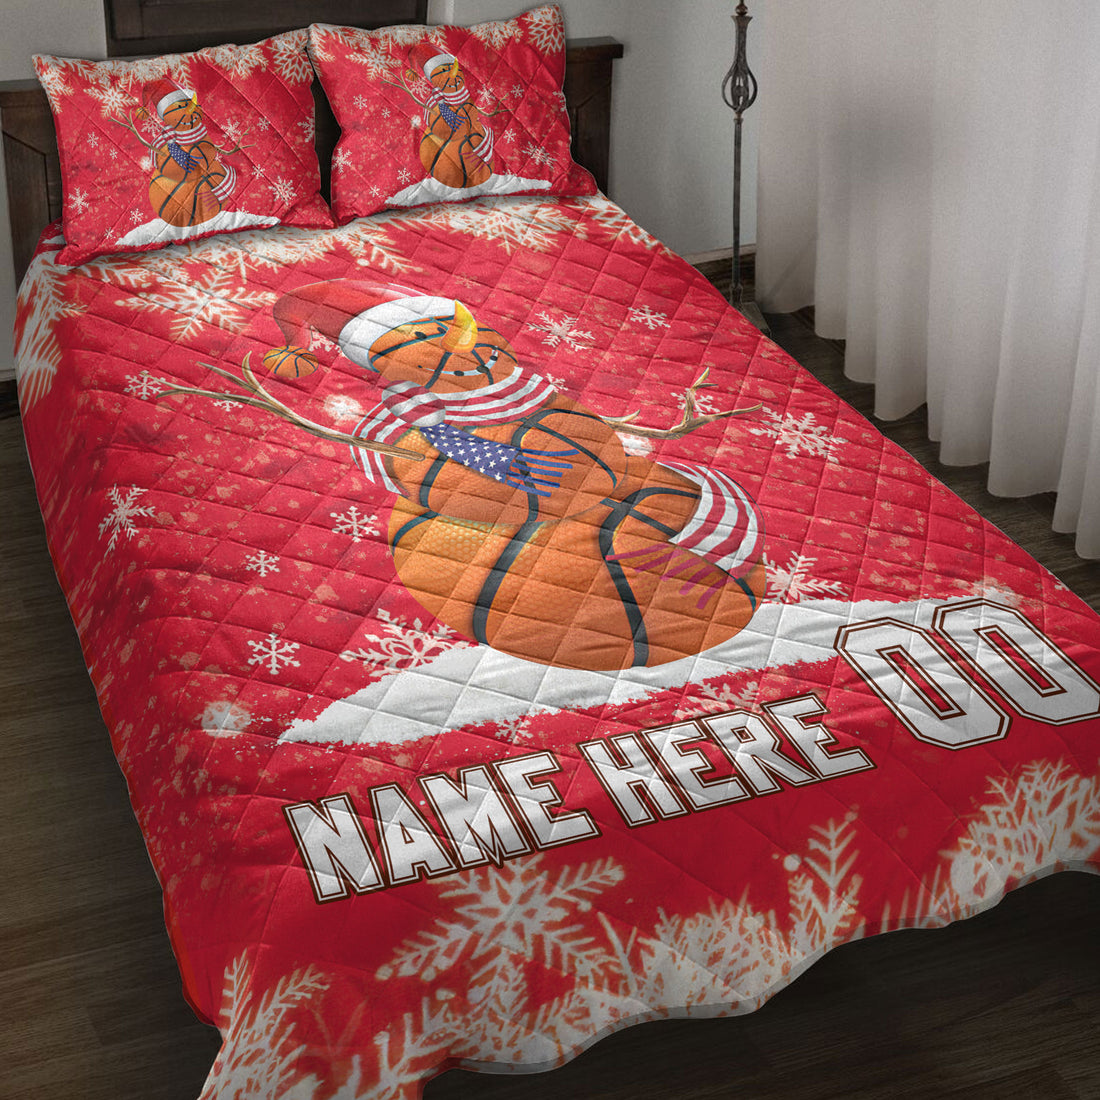 Ohaprints-Quilt-Bed-Set-Pillowcase-Basketball-Snowman-Christmas-Gift-Custom-Personalized-Name-Number-Blanket-Bedspread-Bedding-4260-Throw (55'' x 60'')